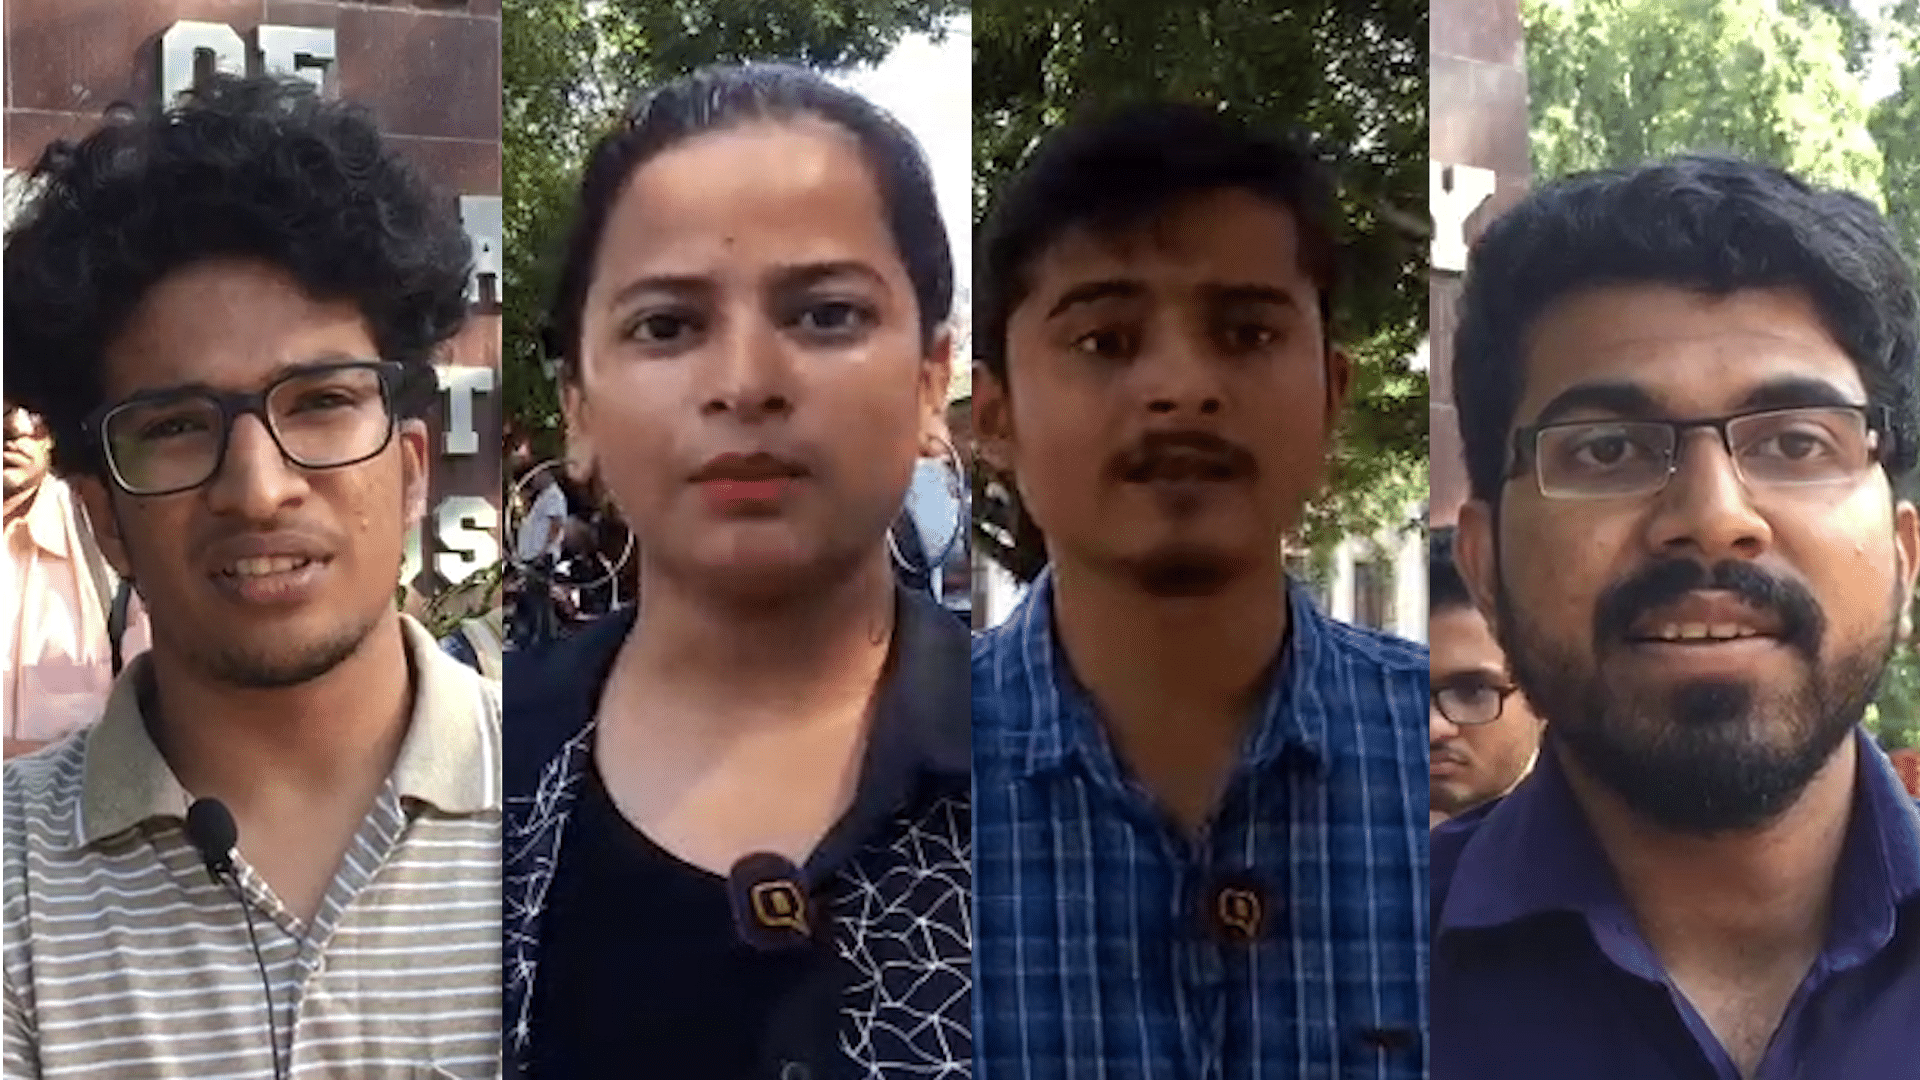 Students from different universities across the nation condemned Sofia’s arrest and criticised the government for trying to suppress voices of dissent.